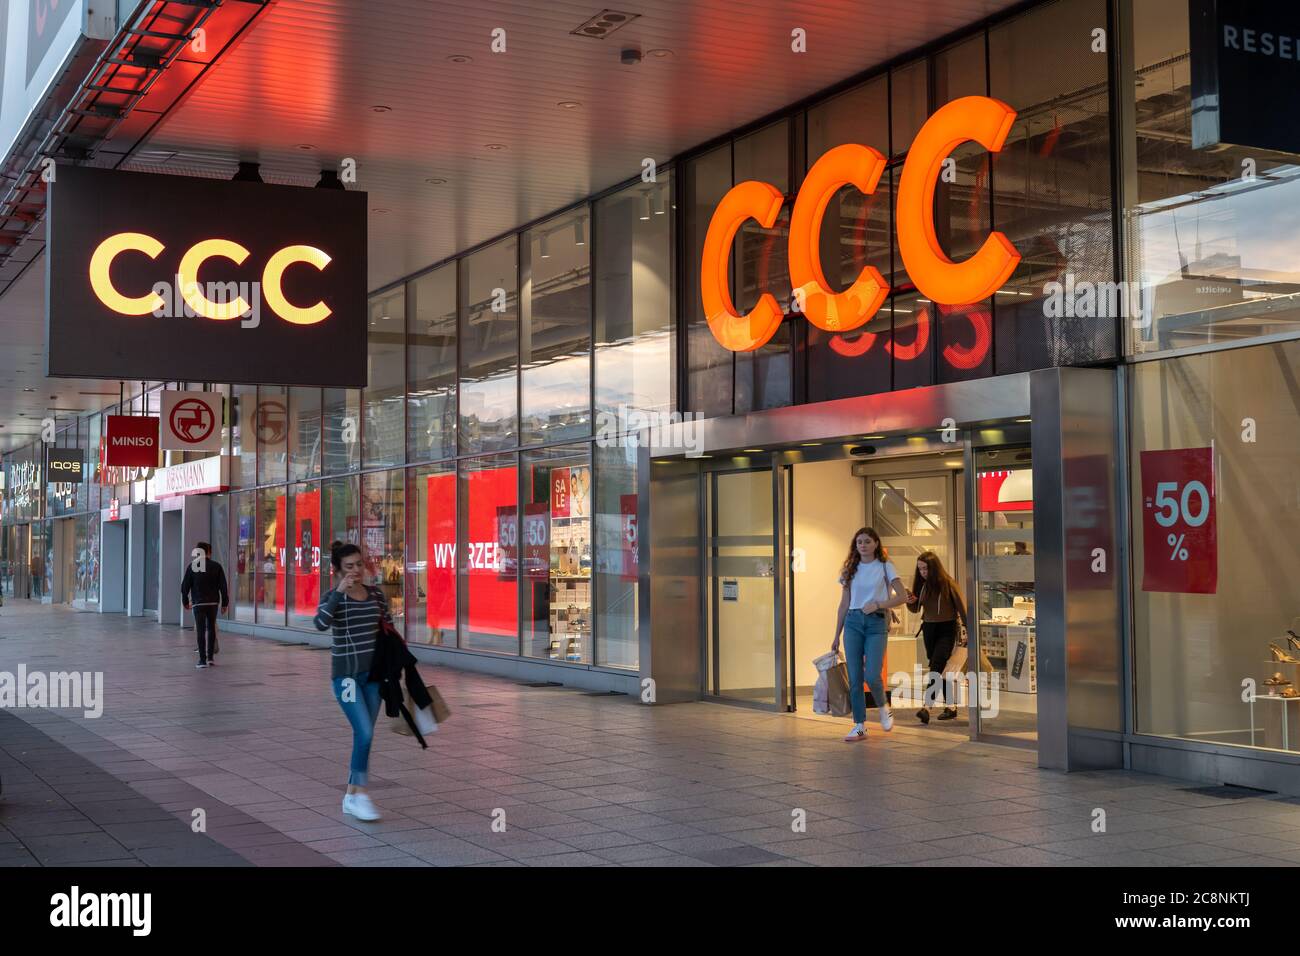 Warsaw, Poland - June 18, 2020: CCC shoes and bags store in the city center in the evening Stock Photo